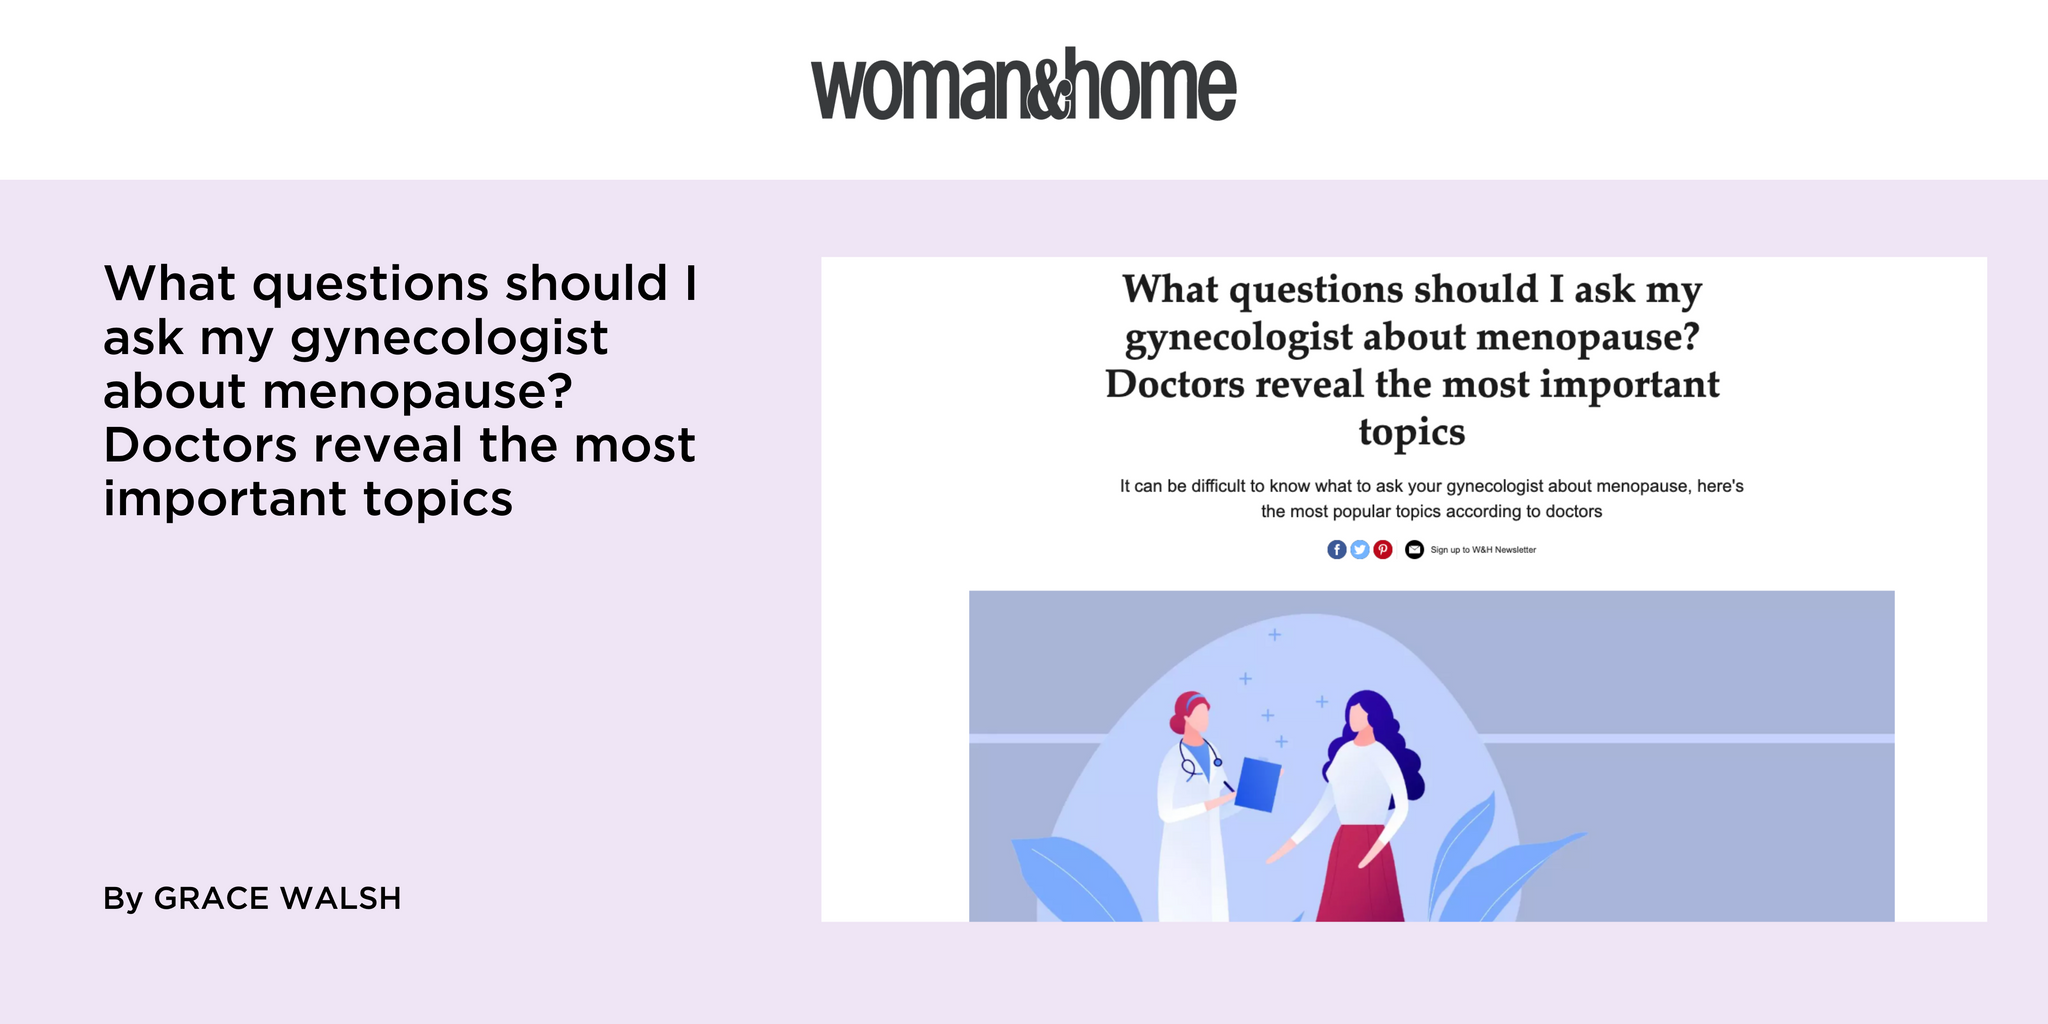 What questions should I ask my gynecologist about menopause? Doctors reveal the most important topics